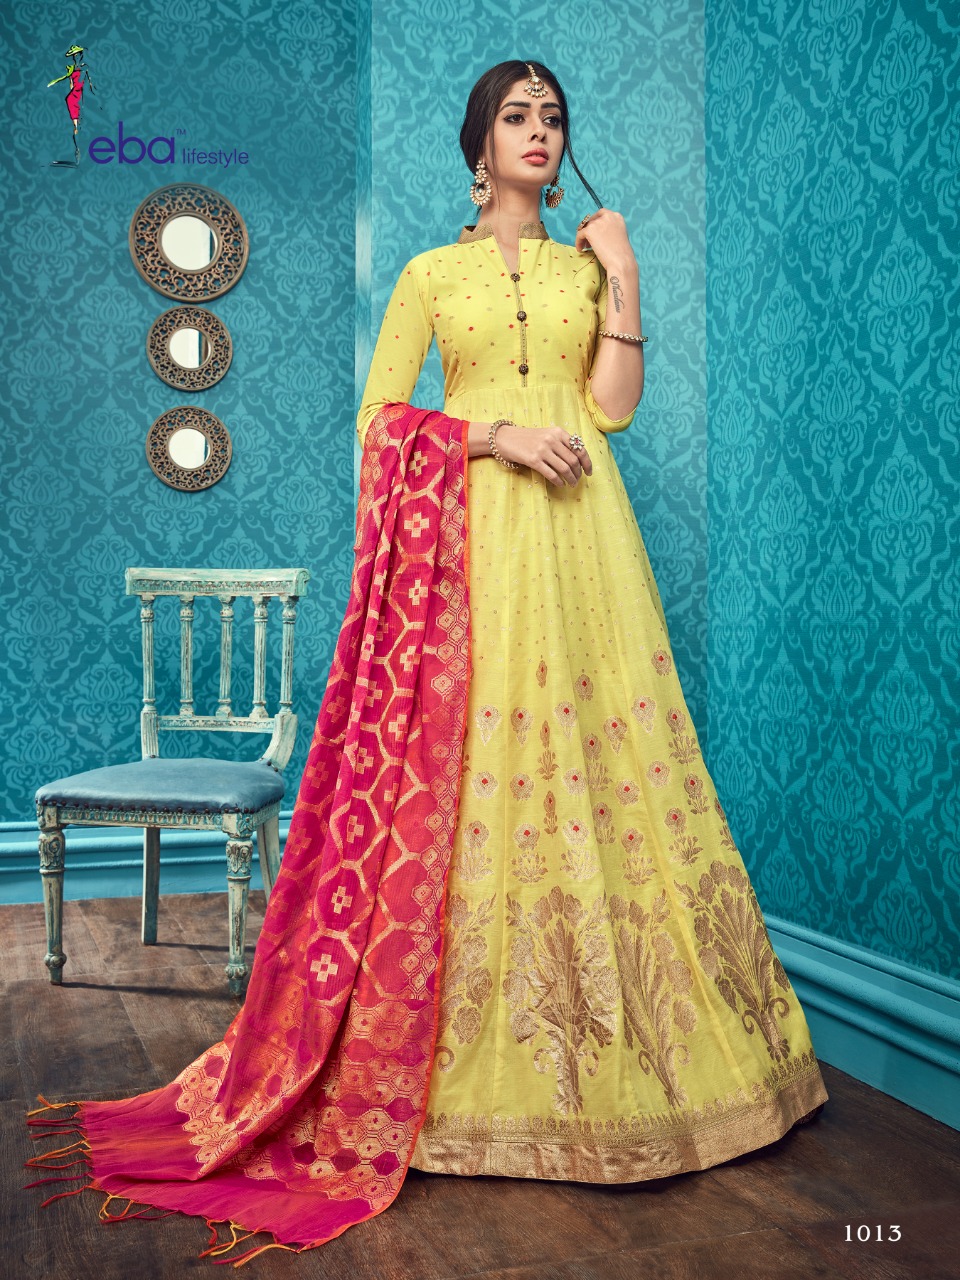 Eba lifestyle neerja vol 2 New readymade Festive collection of gowns